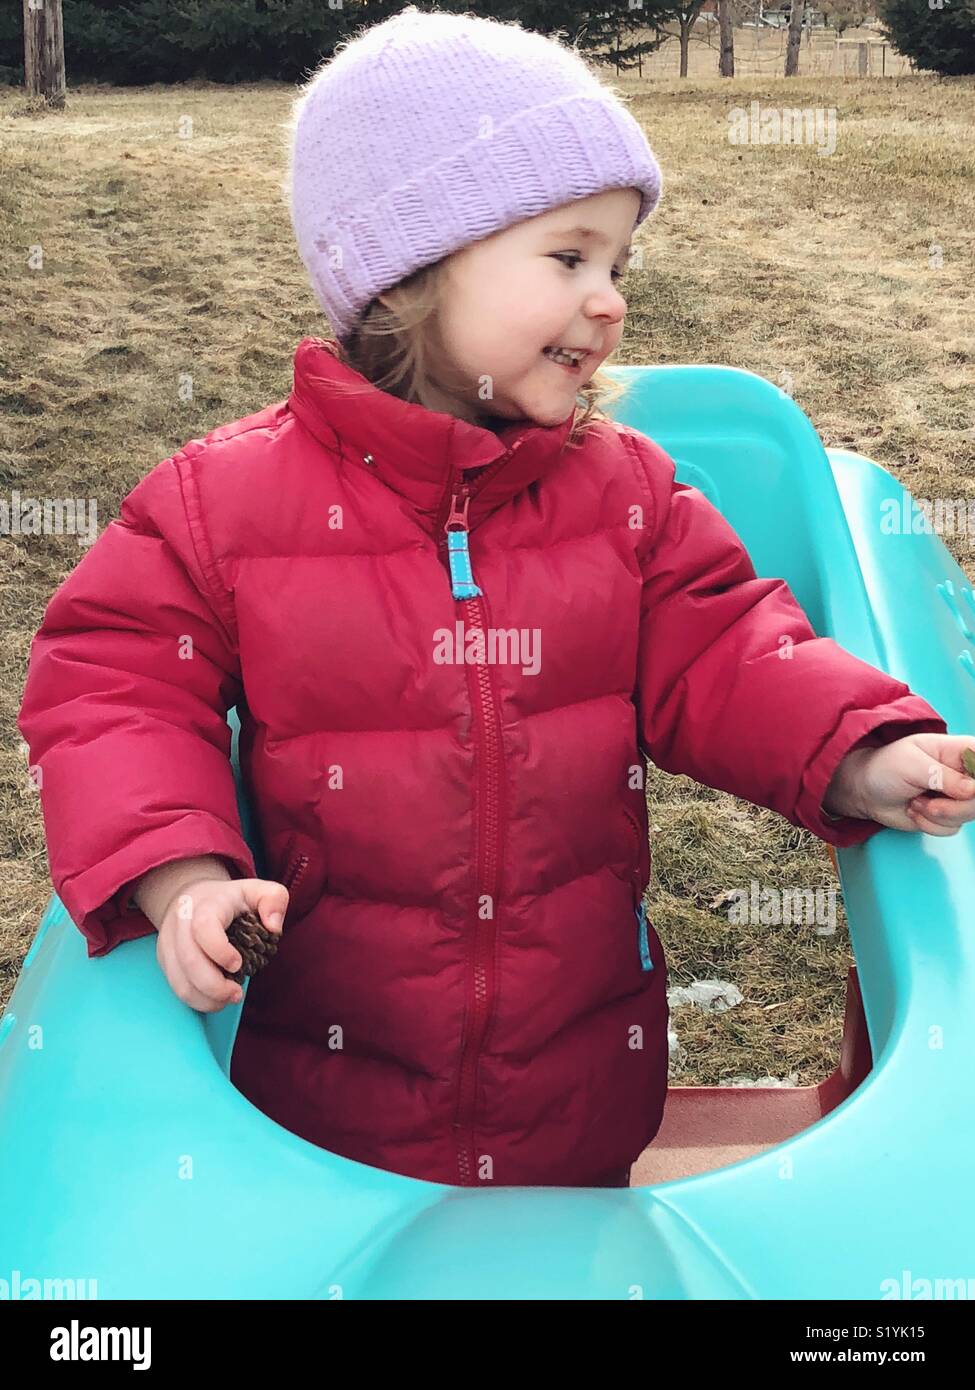 Toddler girl on plastic play structure in backyard/garden smiling looking to the side Stock Photo